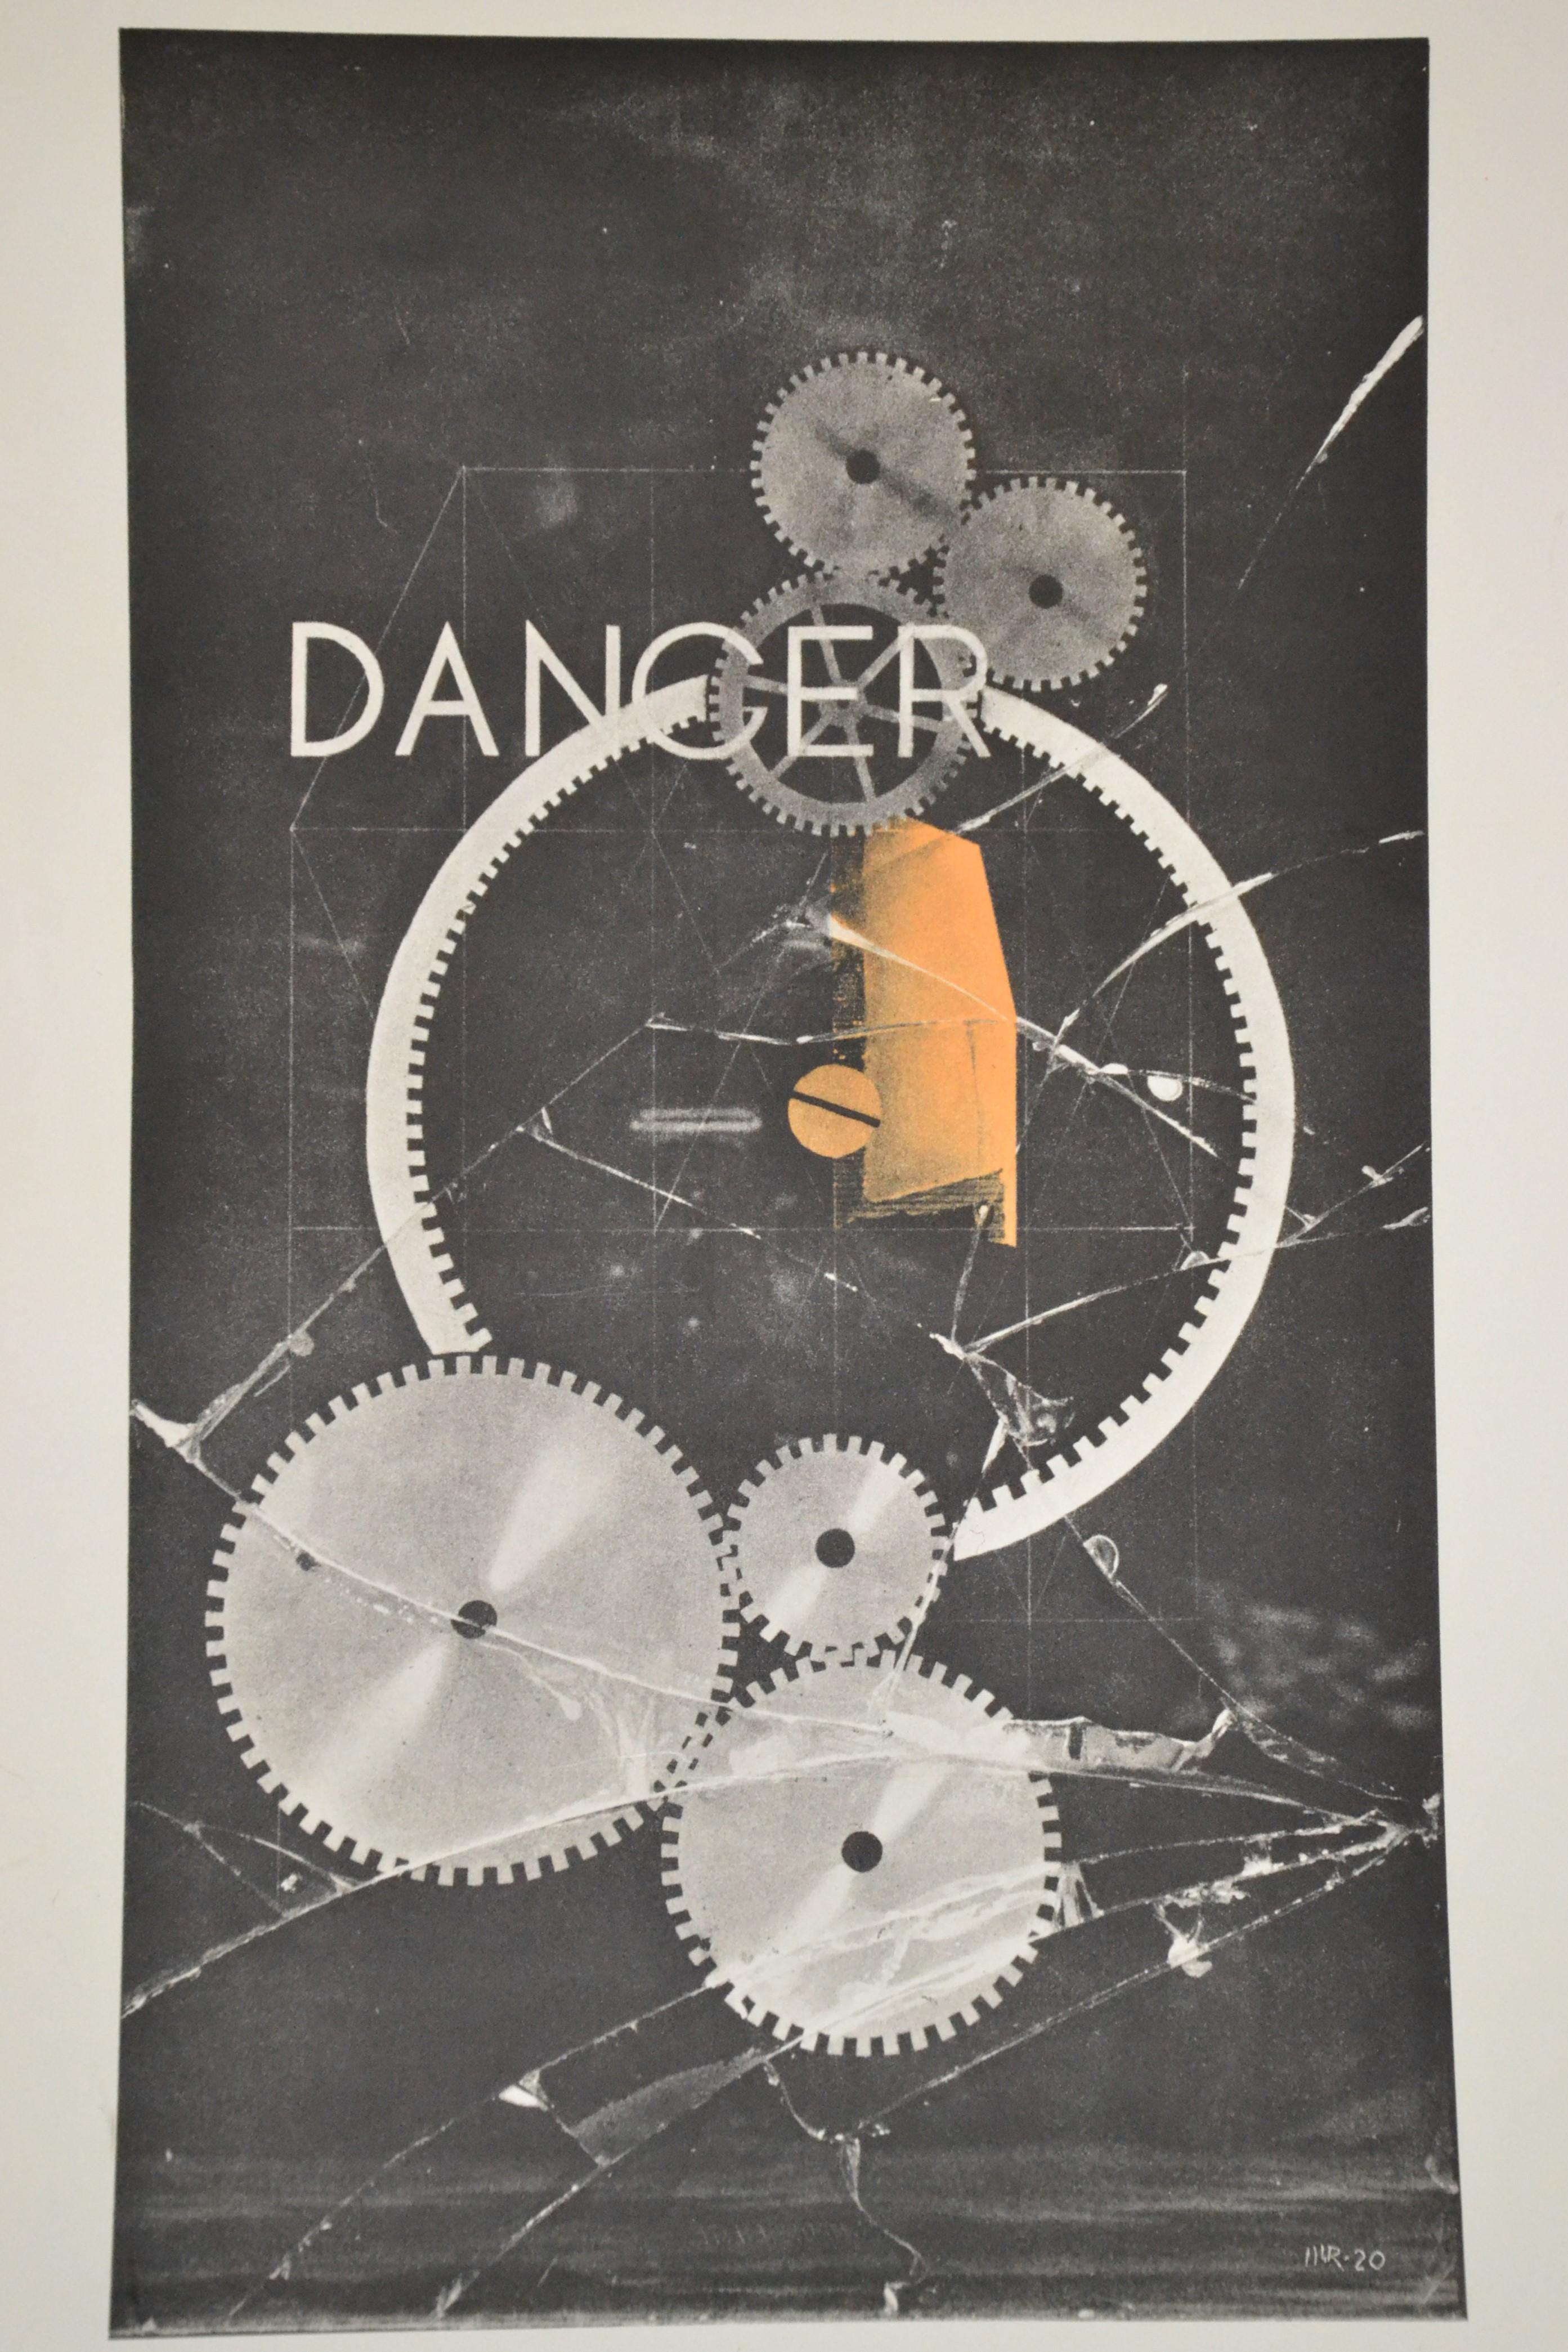 Dancer / Danger - Lithographed Poster After Man Ray - 1972 3